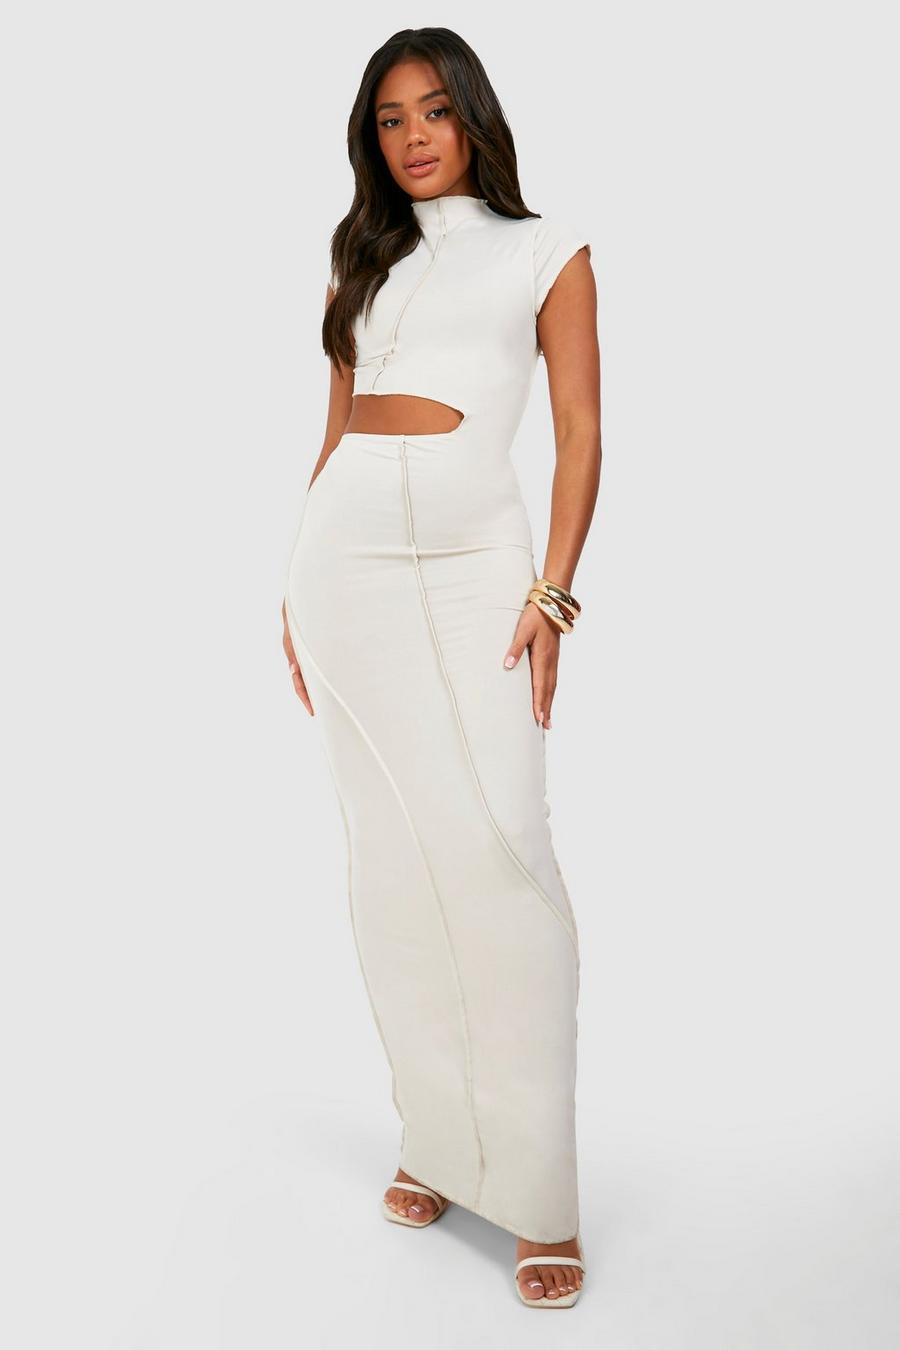 Stone Exposed Seam Cut Out Maxi Dress 